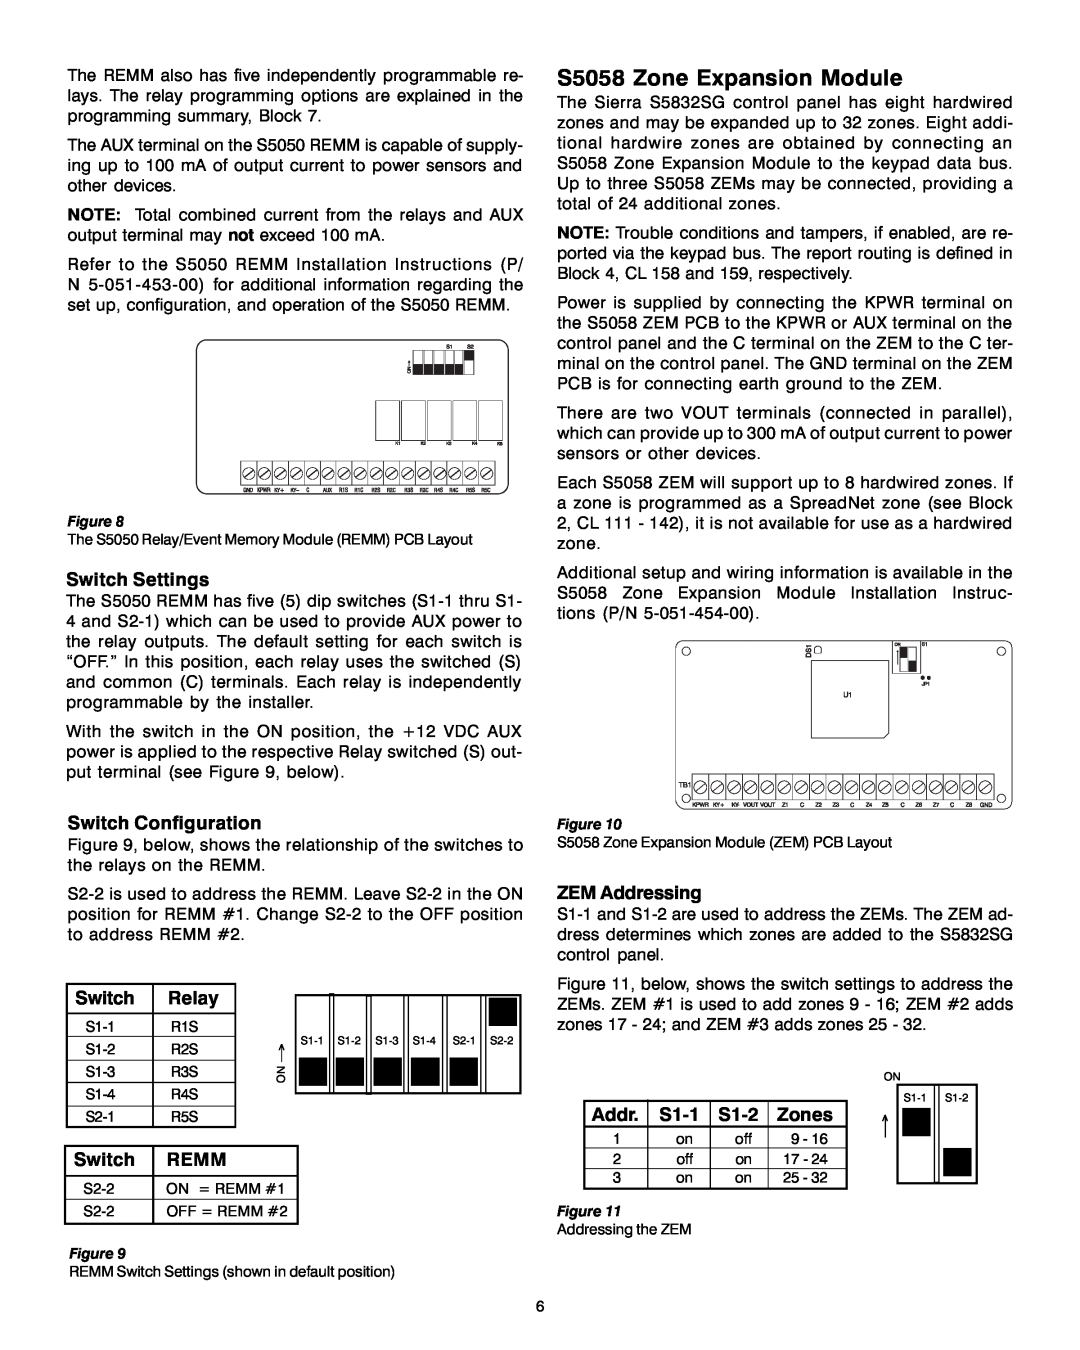 Sierra S5832SG installation instructions S5058 Zone Expansion Module 